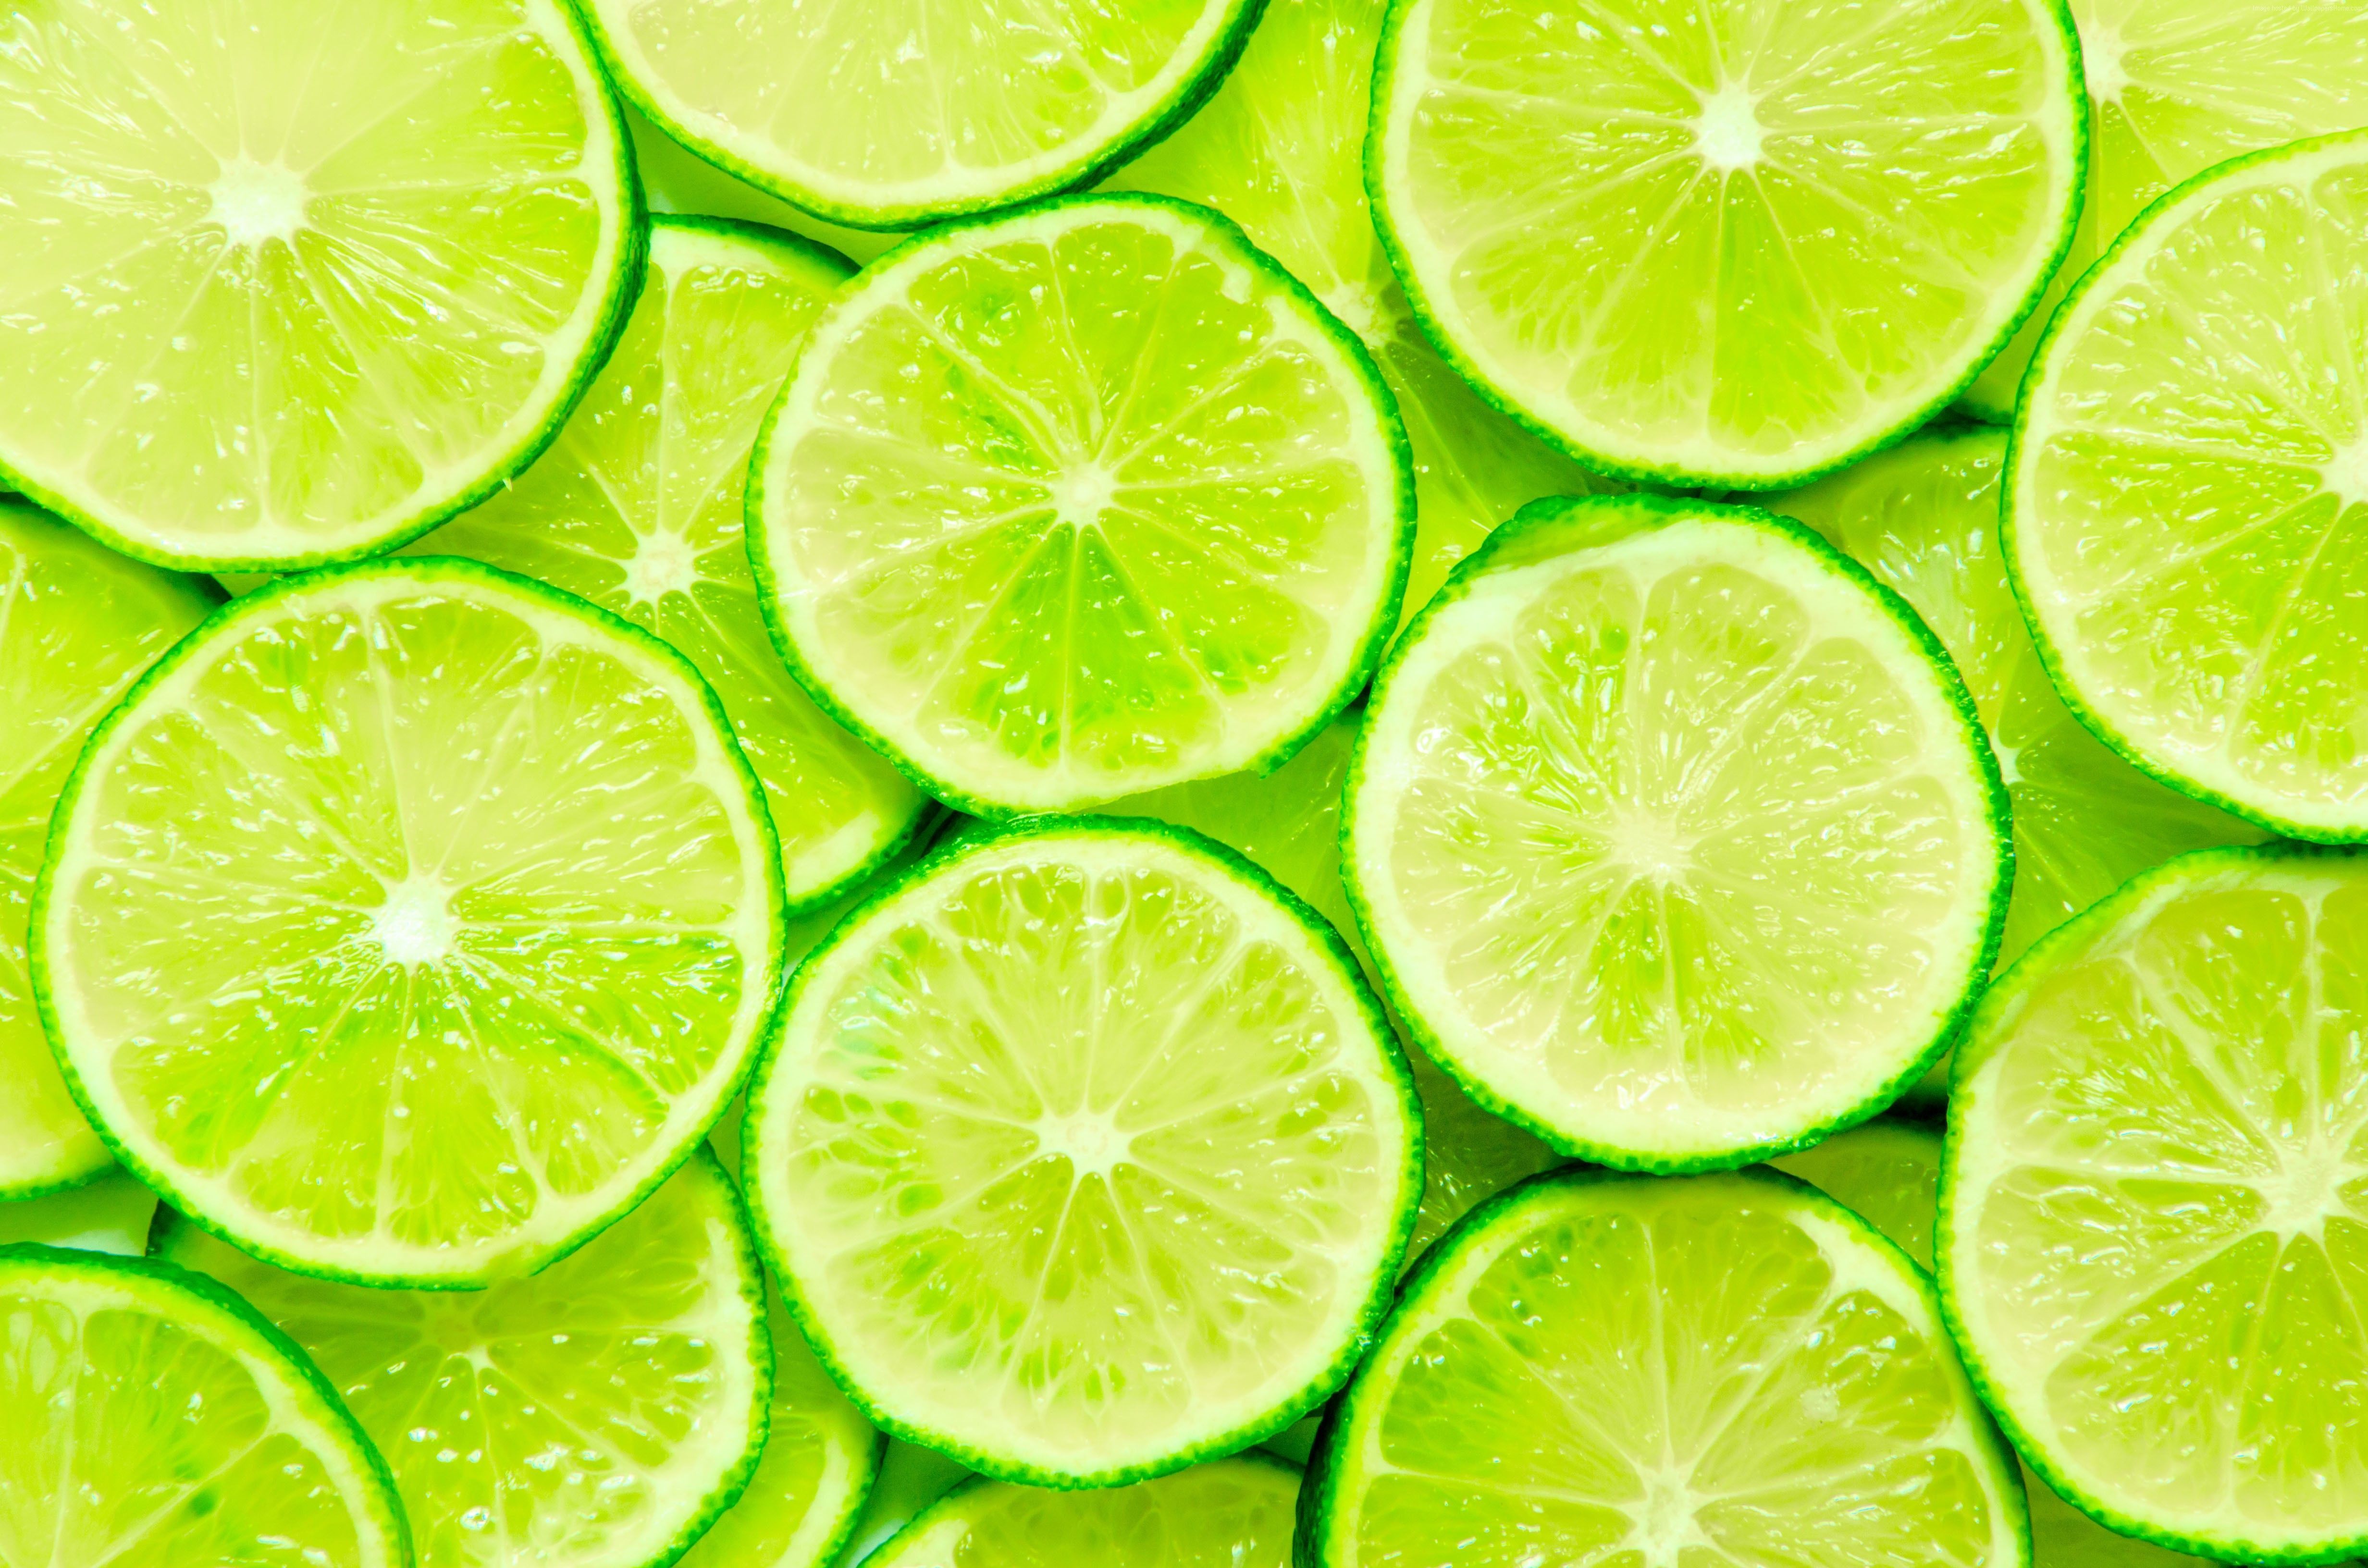 A close up of sliced limes - Lime green